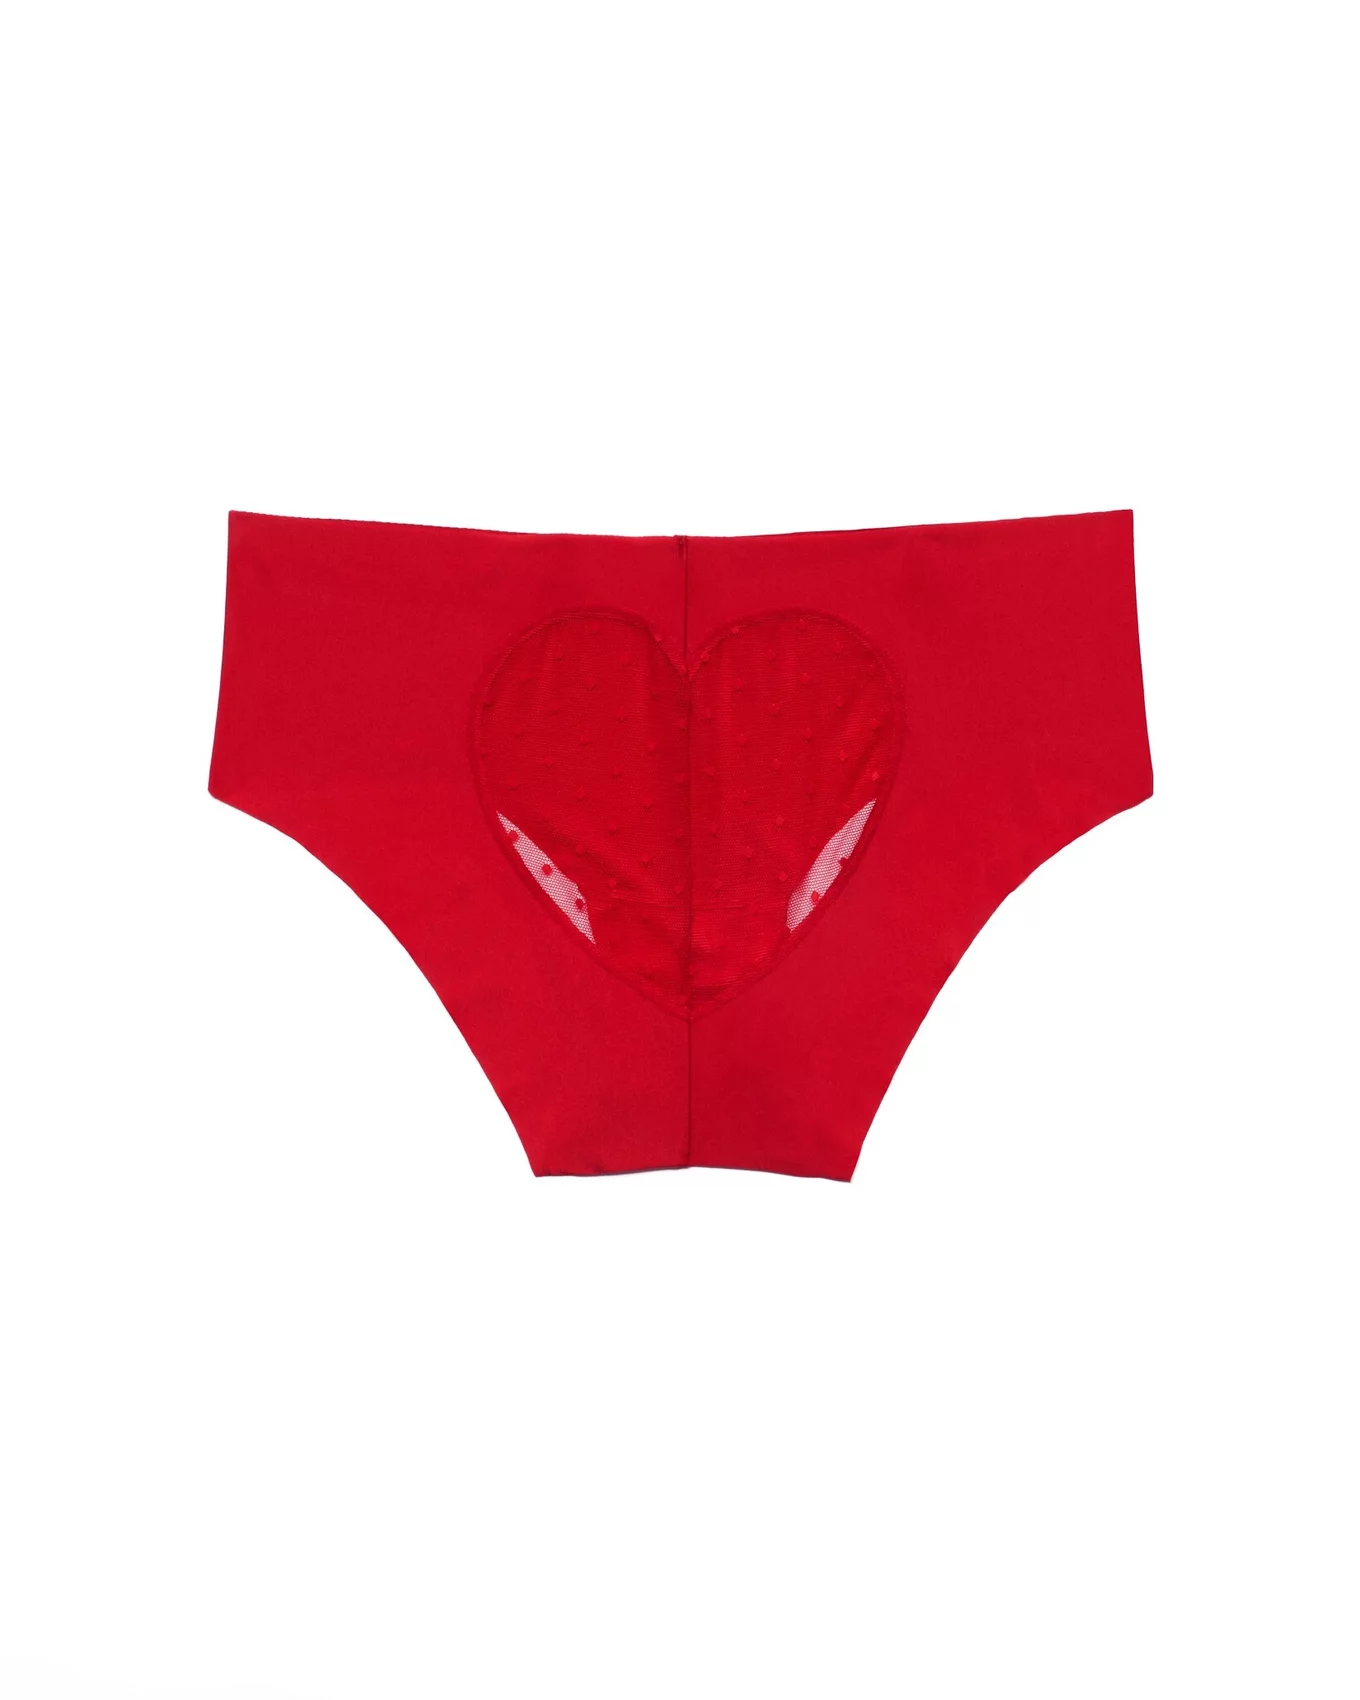 Loveheart Lace Sheer Knickers (More Colors)